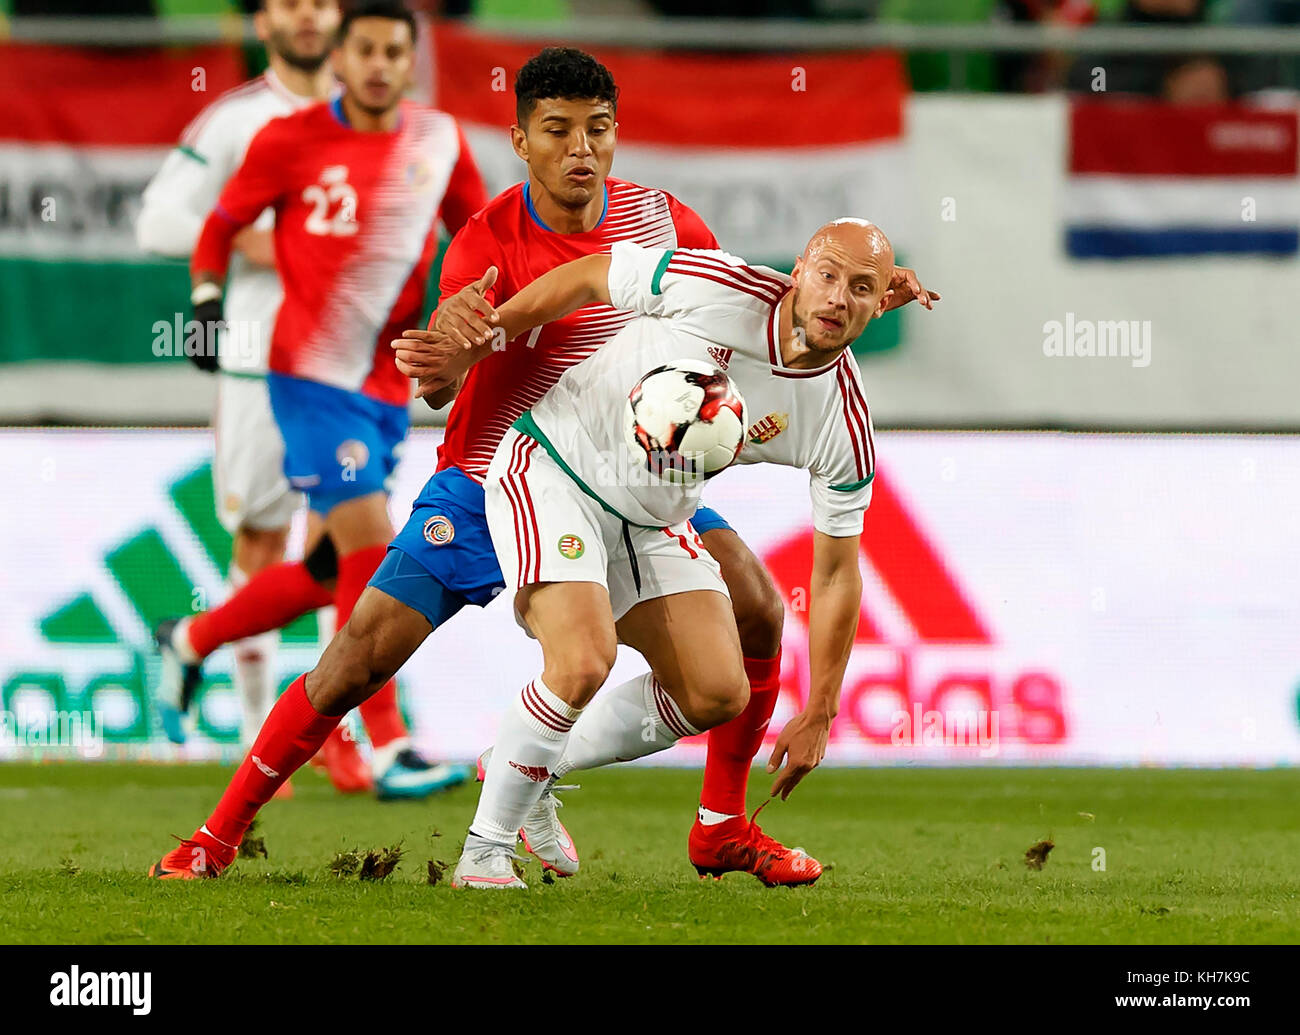 Budapest, Hungary. 14th Nov, 2017. Jozsef Varga (R) of Hungary fights for the ball with Johan Venegas (L) of Costa Rica during the at Groupama Arena on November 14, 2017 in Budapest, Hungary. Credit: Laszlo Szirtesi/Alamy Live News Stock Photo